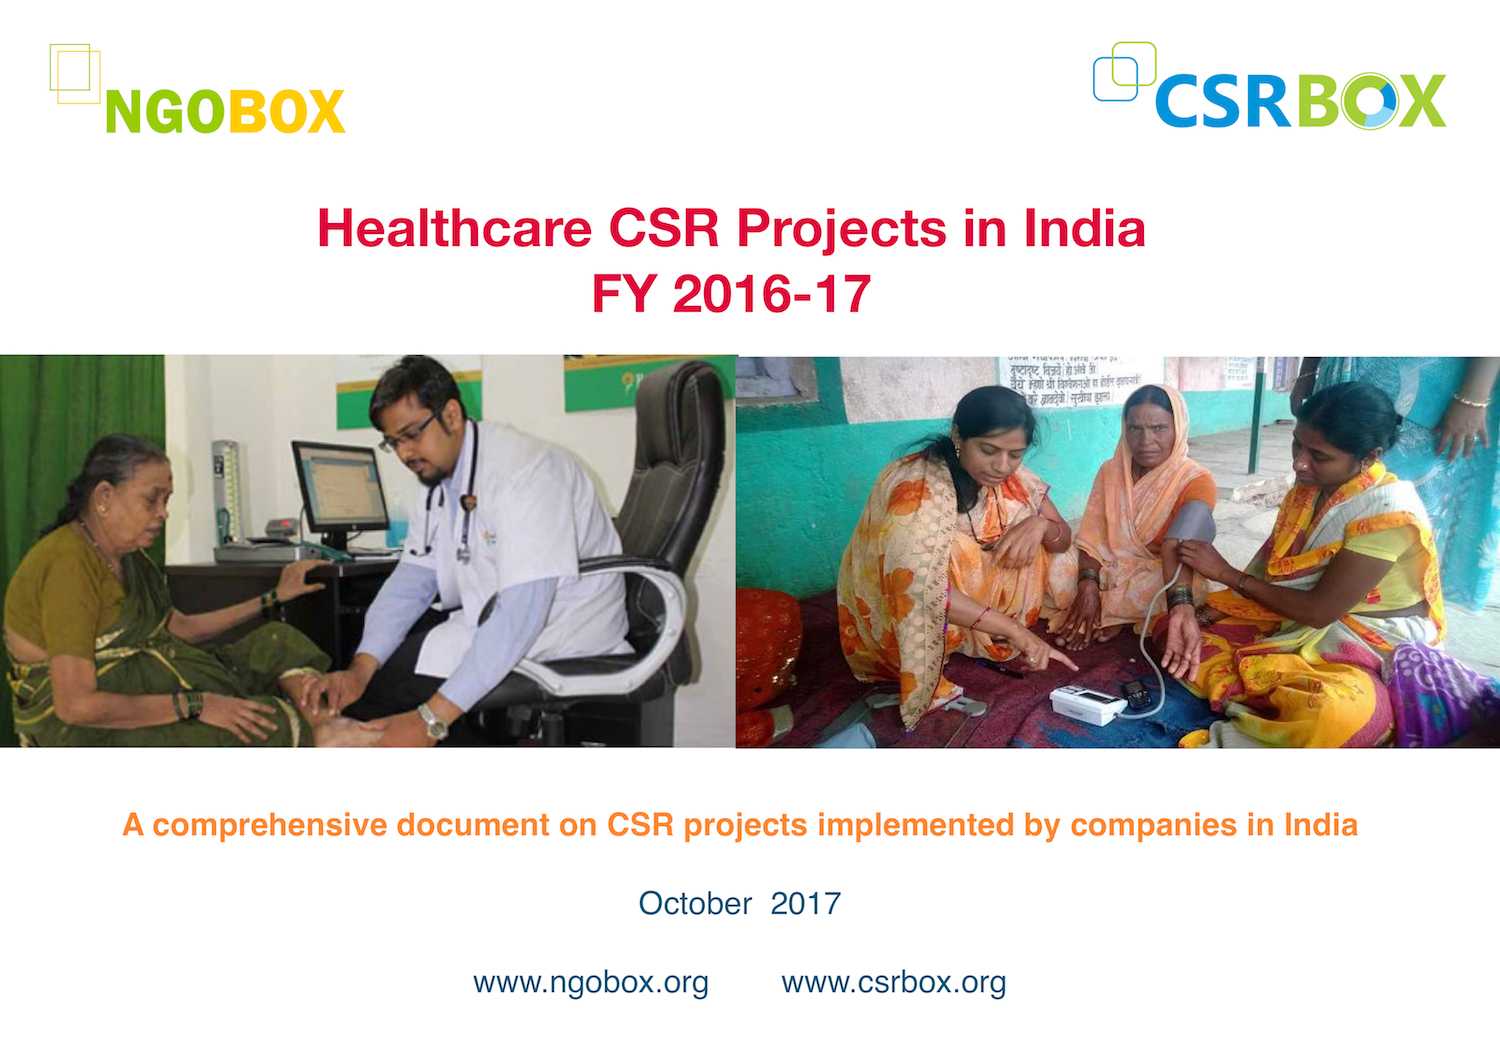 Healthcare CSR Projects in India in 2016-17